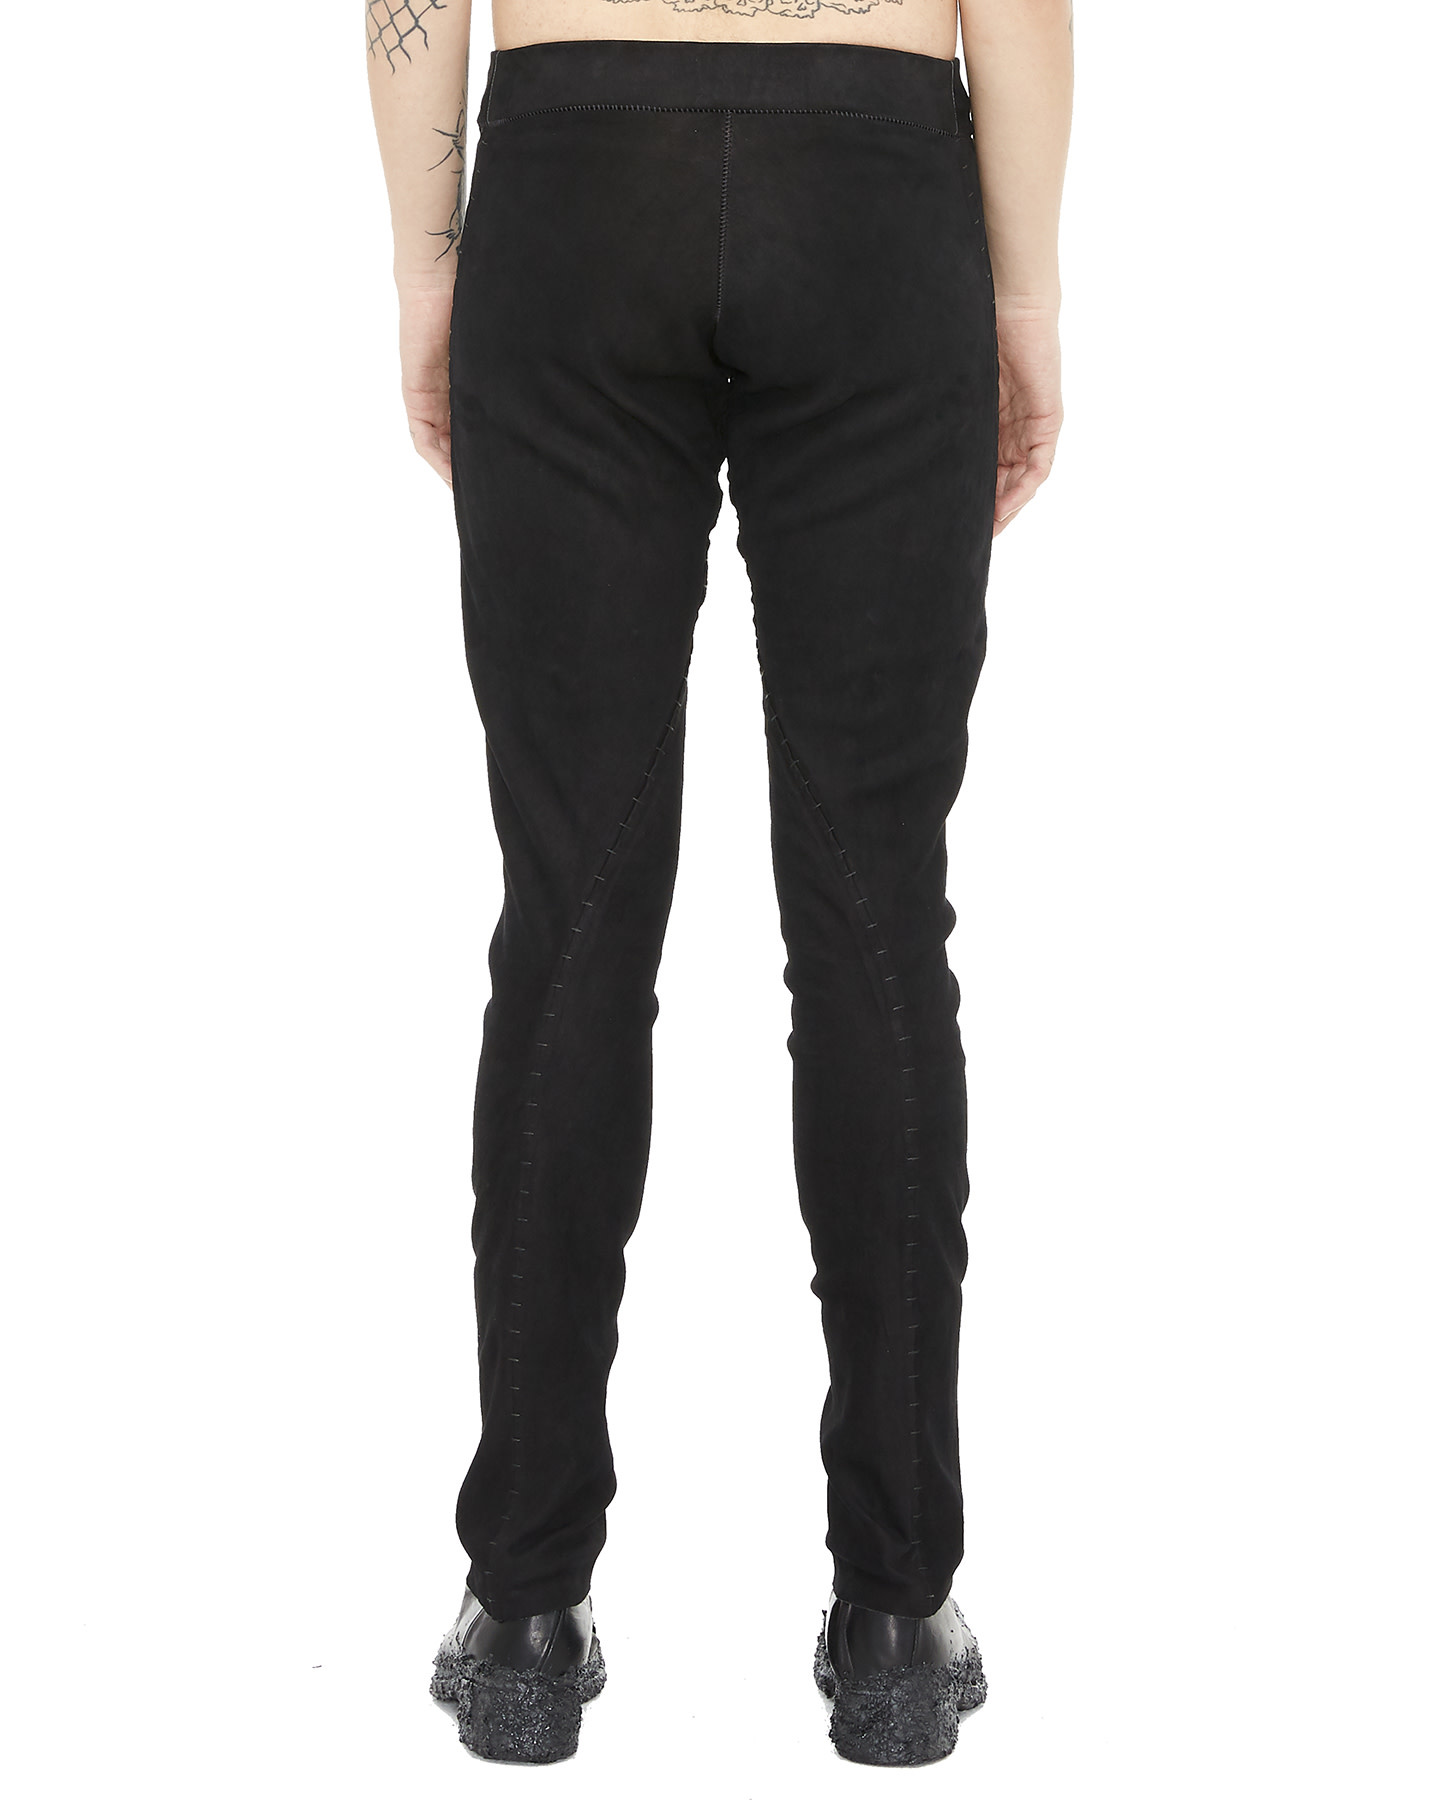 Sousmarin Stretch Leather Pants - Black By Isaac Sellam - Shop